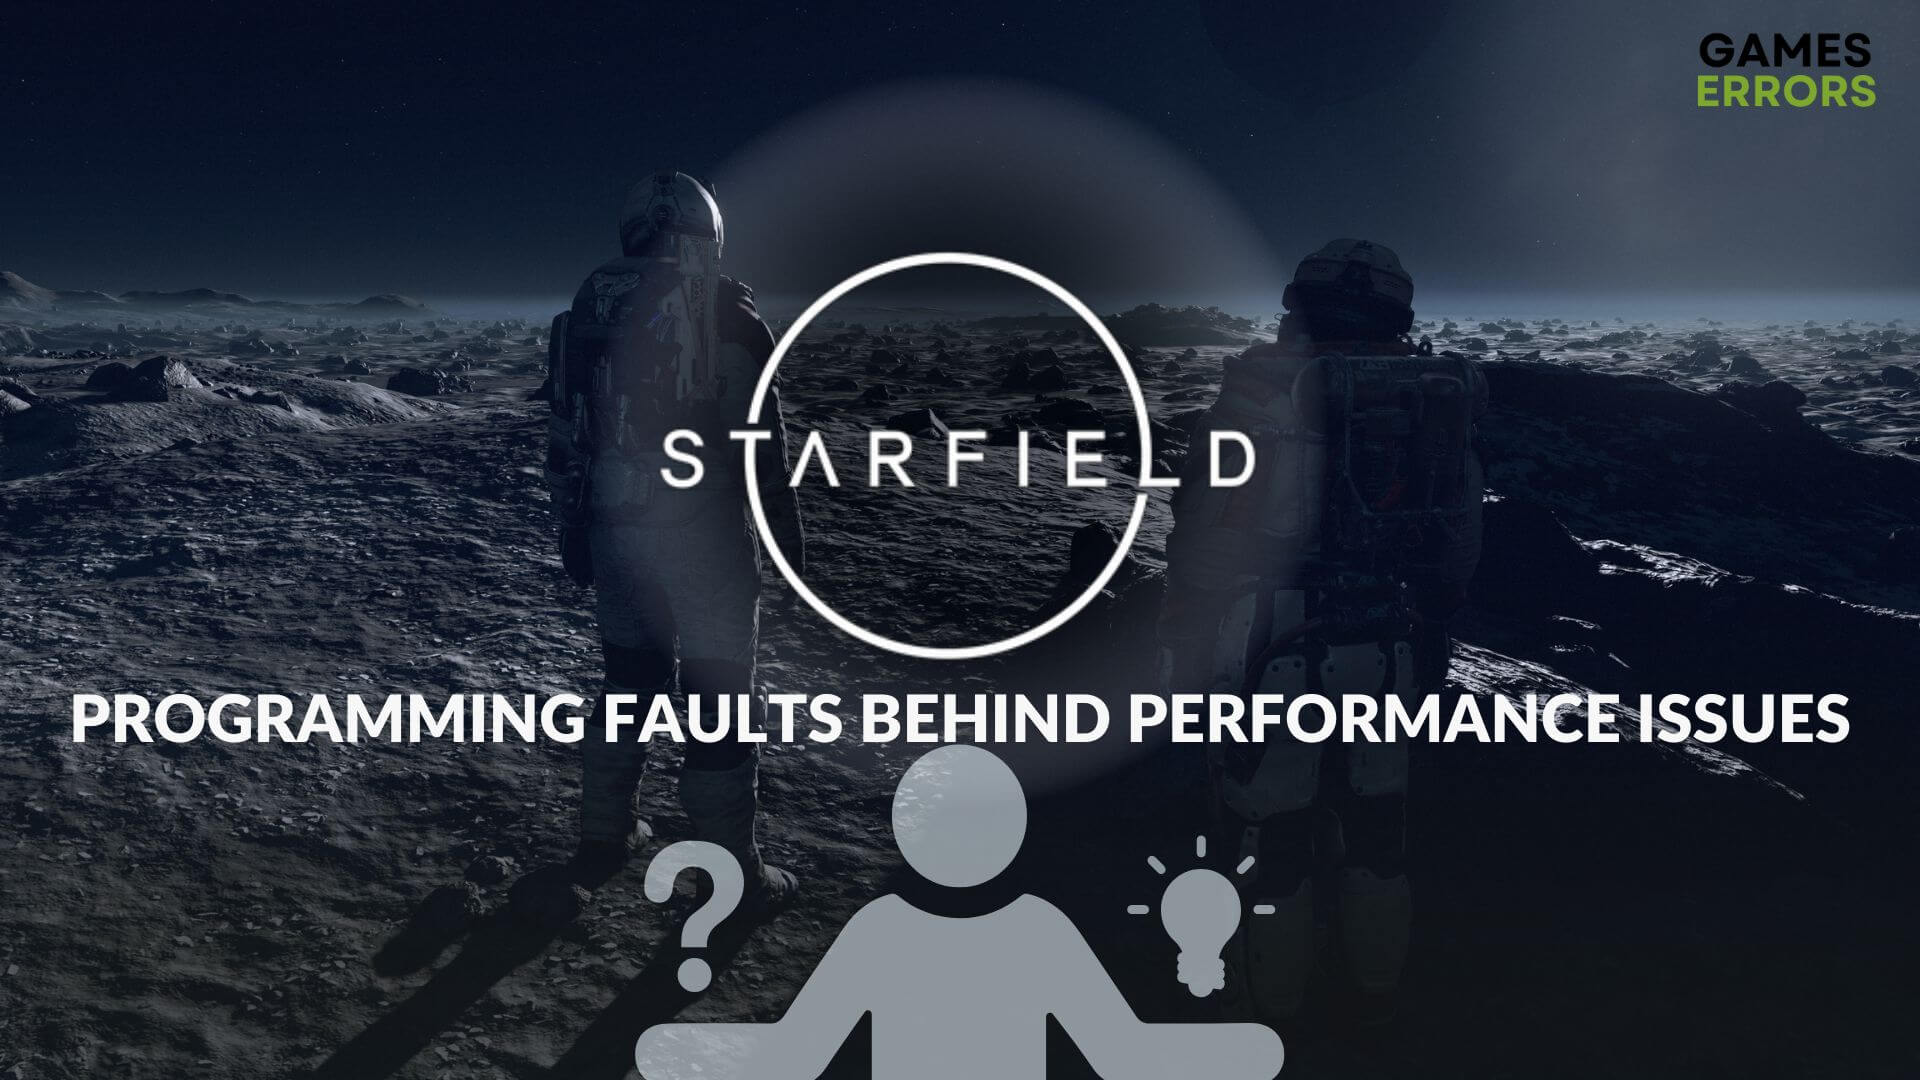 vkd3d developer found major programming faults behind starfield performance issues